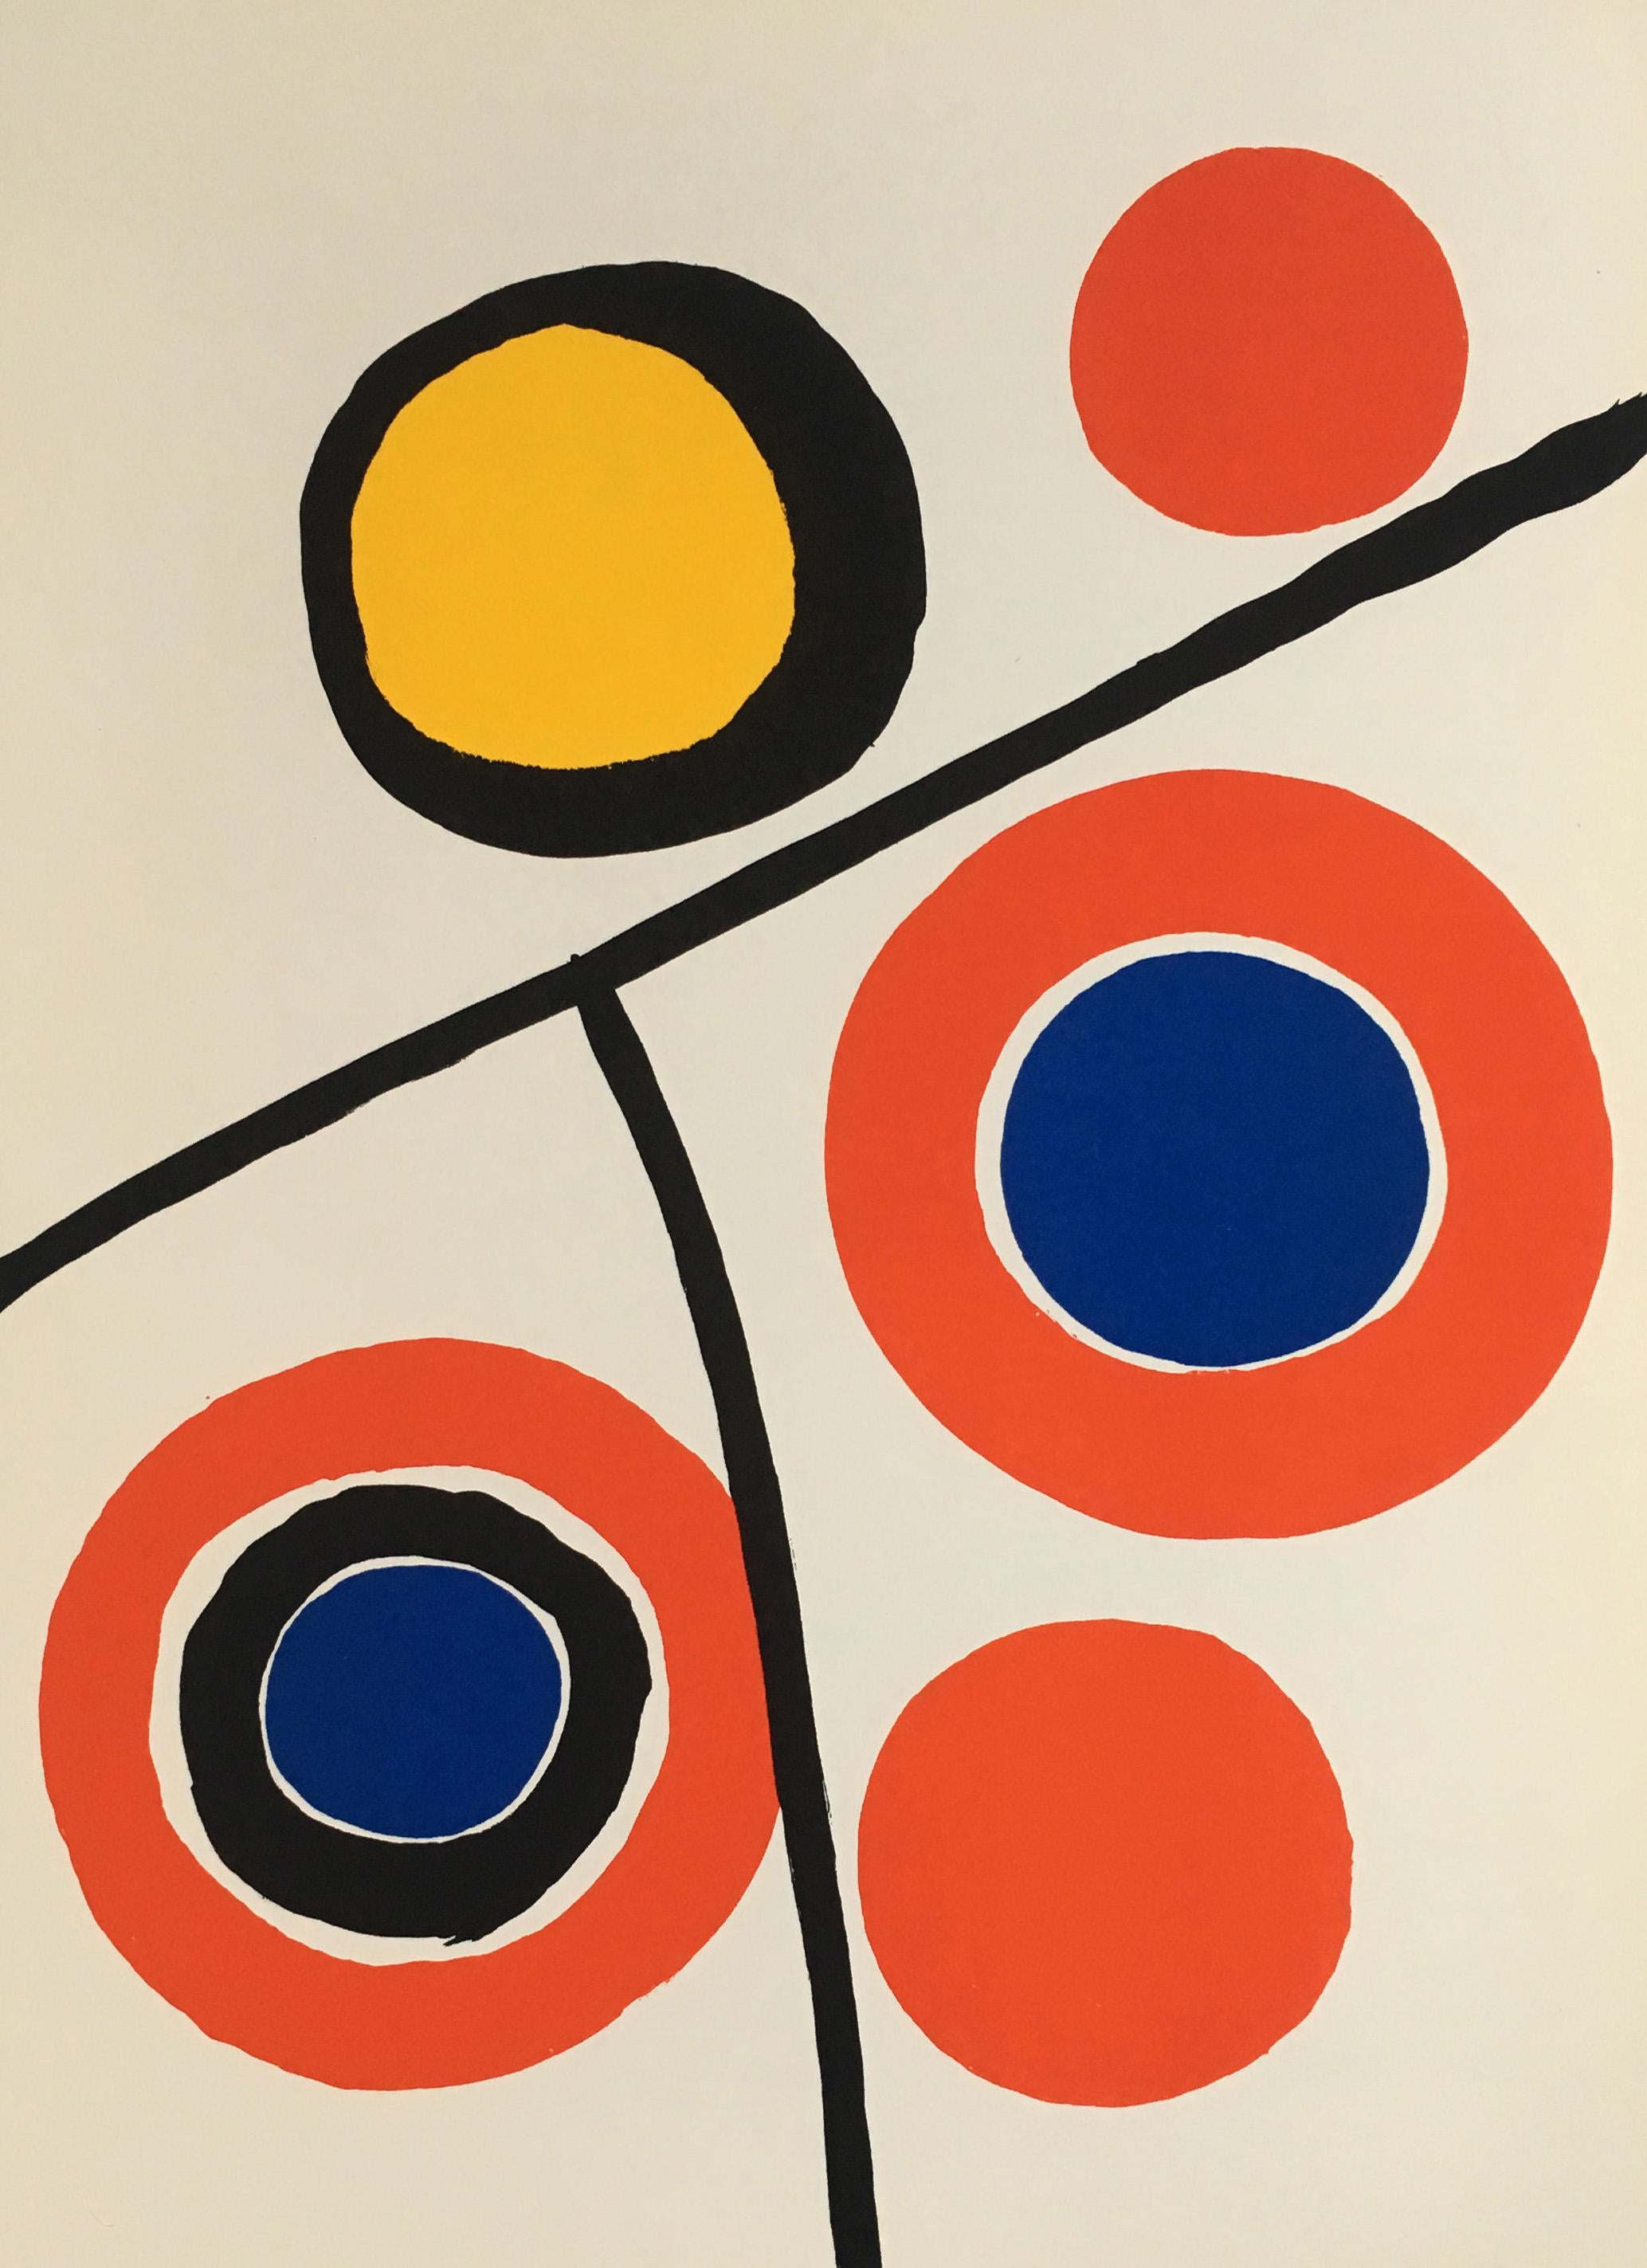 Alexander Calder Lithograph c. 1973 from Derrière le miroir:

Lithograph in colors; 15 x 11 inches.
Very good overall vintage condition.
Unsigned from an edition of unknown.
From: Derrière le miroir Printed in France c. 1973.

Derrière le miroir:
In